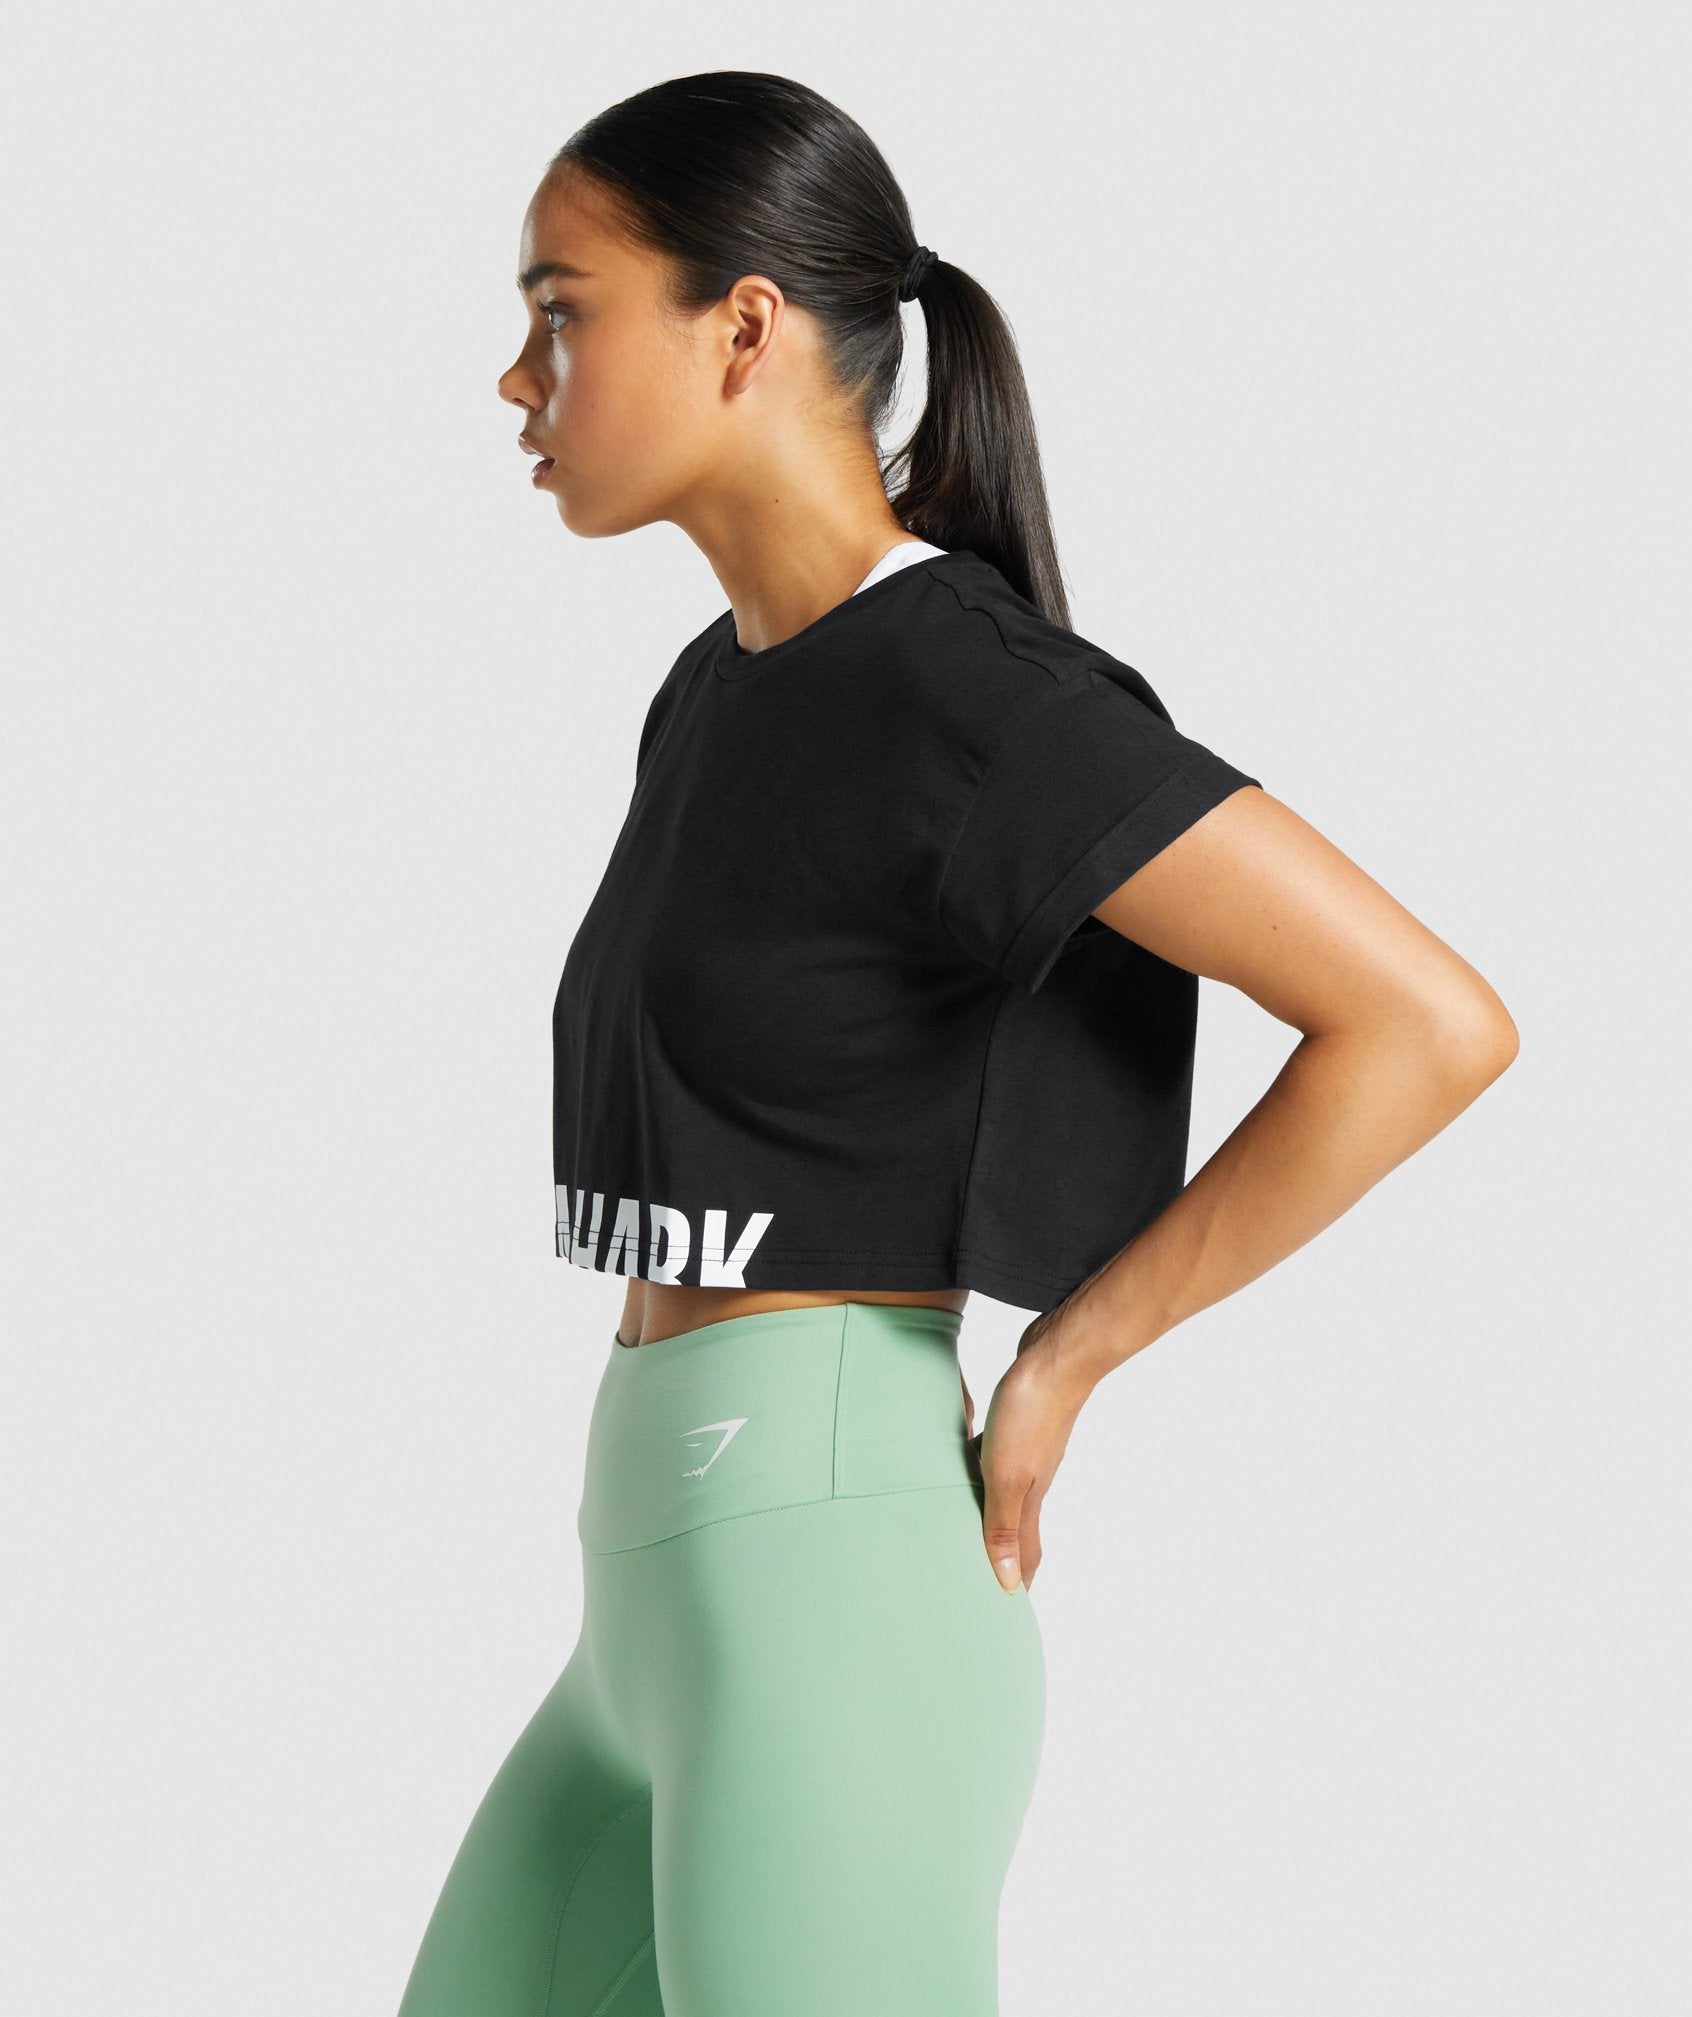 The Women's Basic Crop is one of those Gymshark must-have